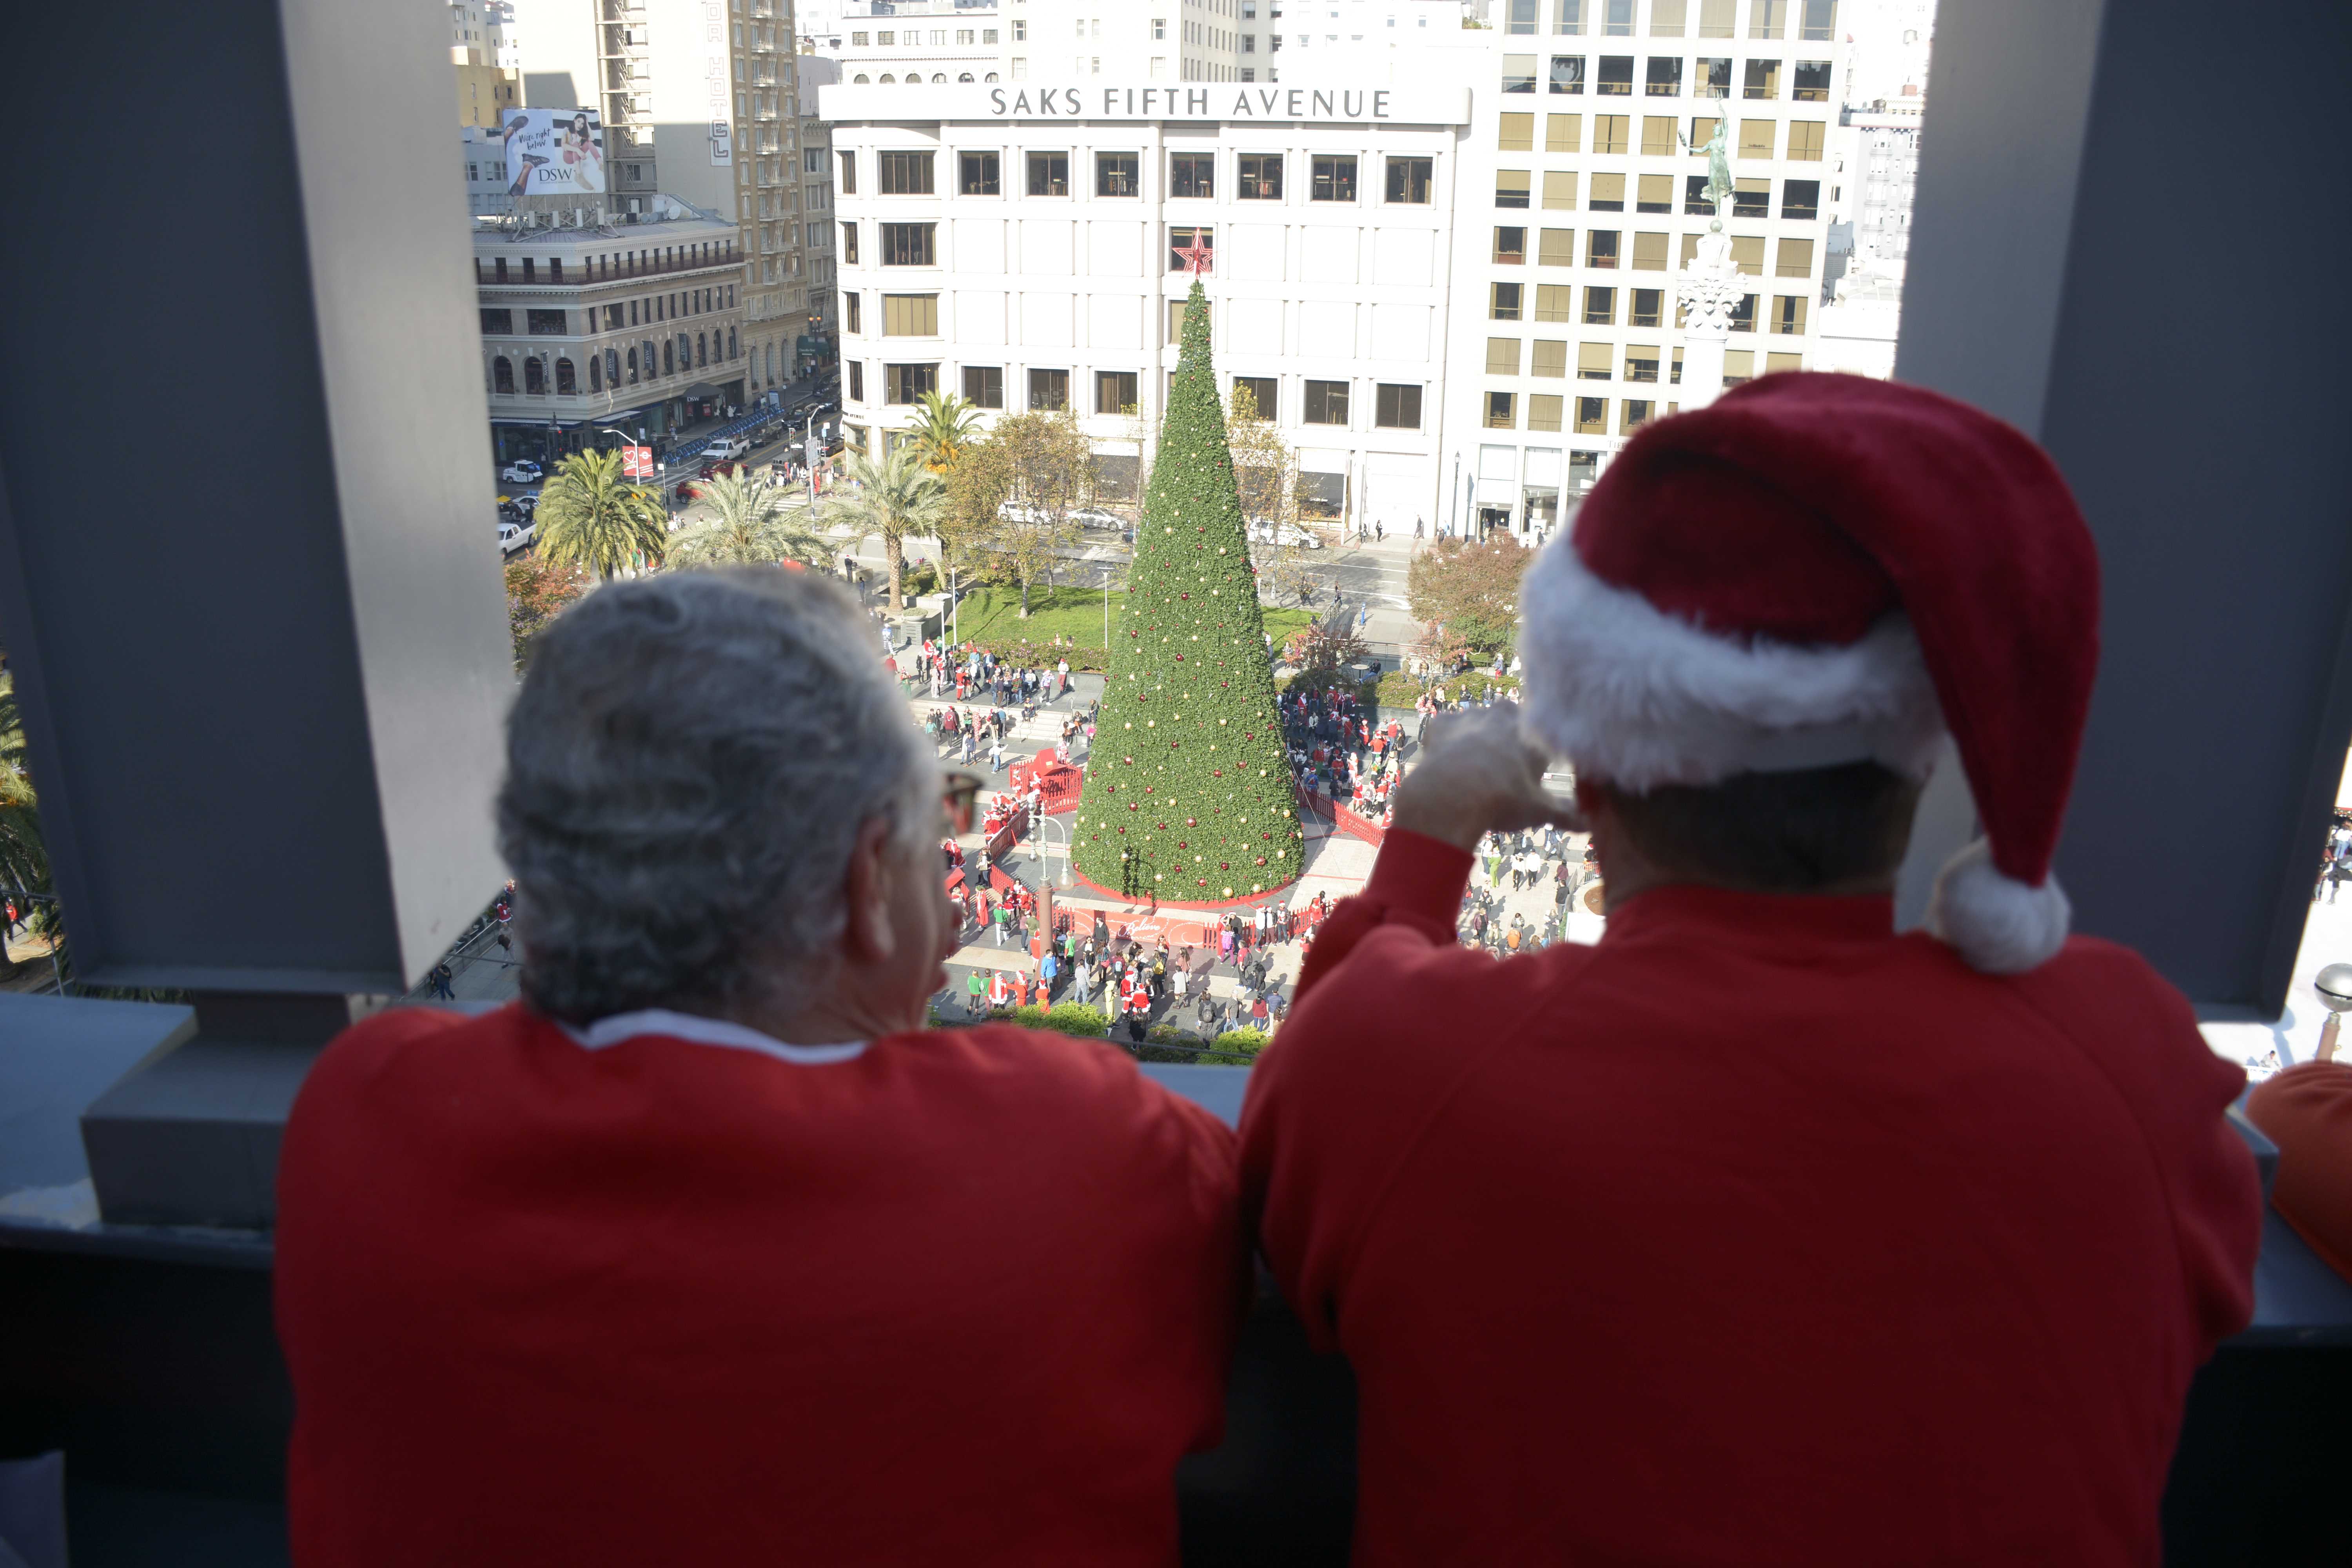 Hundreds of people dressed up as Santa Claus and gathered at Union Square for SantaCon on Saturday, December 8th, 2018. (Tristen Rowean/Golden Gate Xpress)